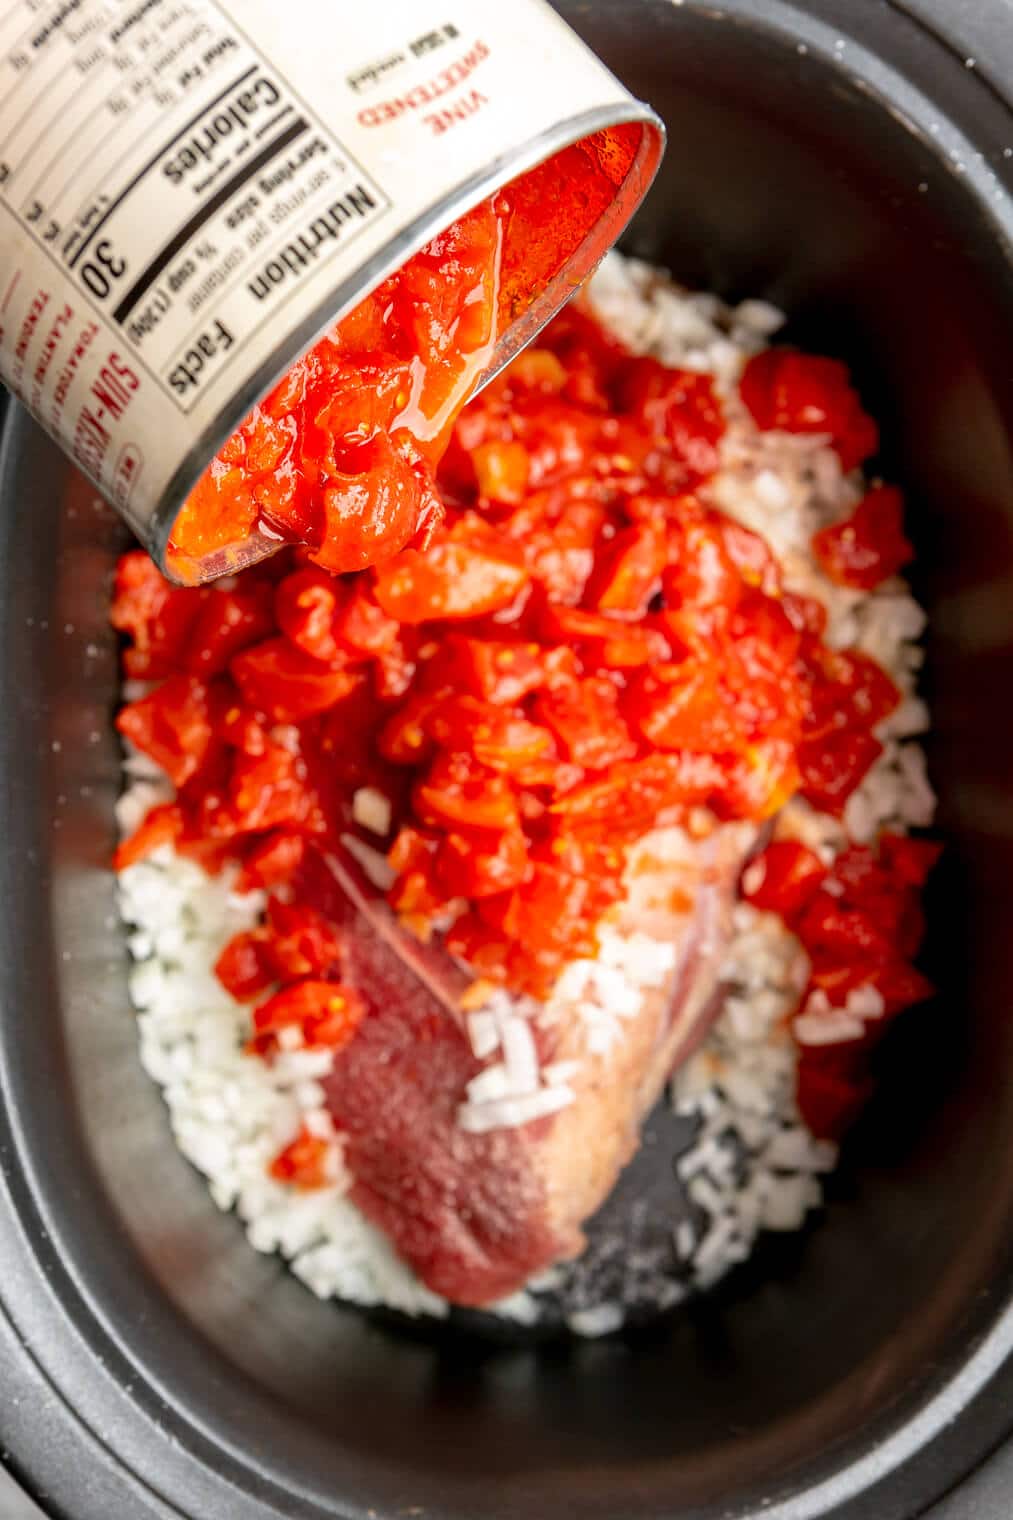 Canned diced tomatoes being poured into a crockpot with beef roast and onions.